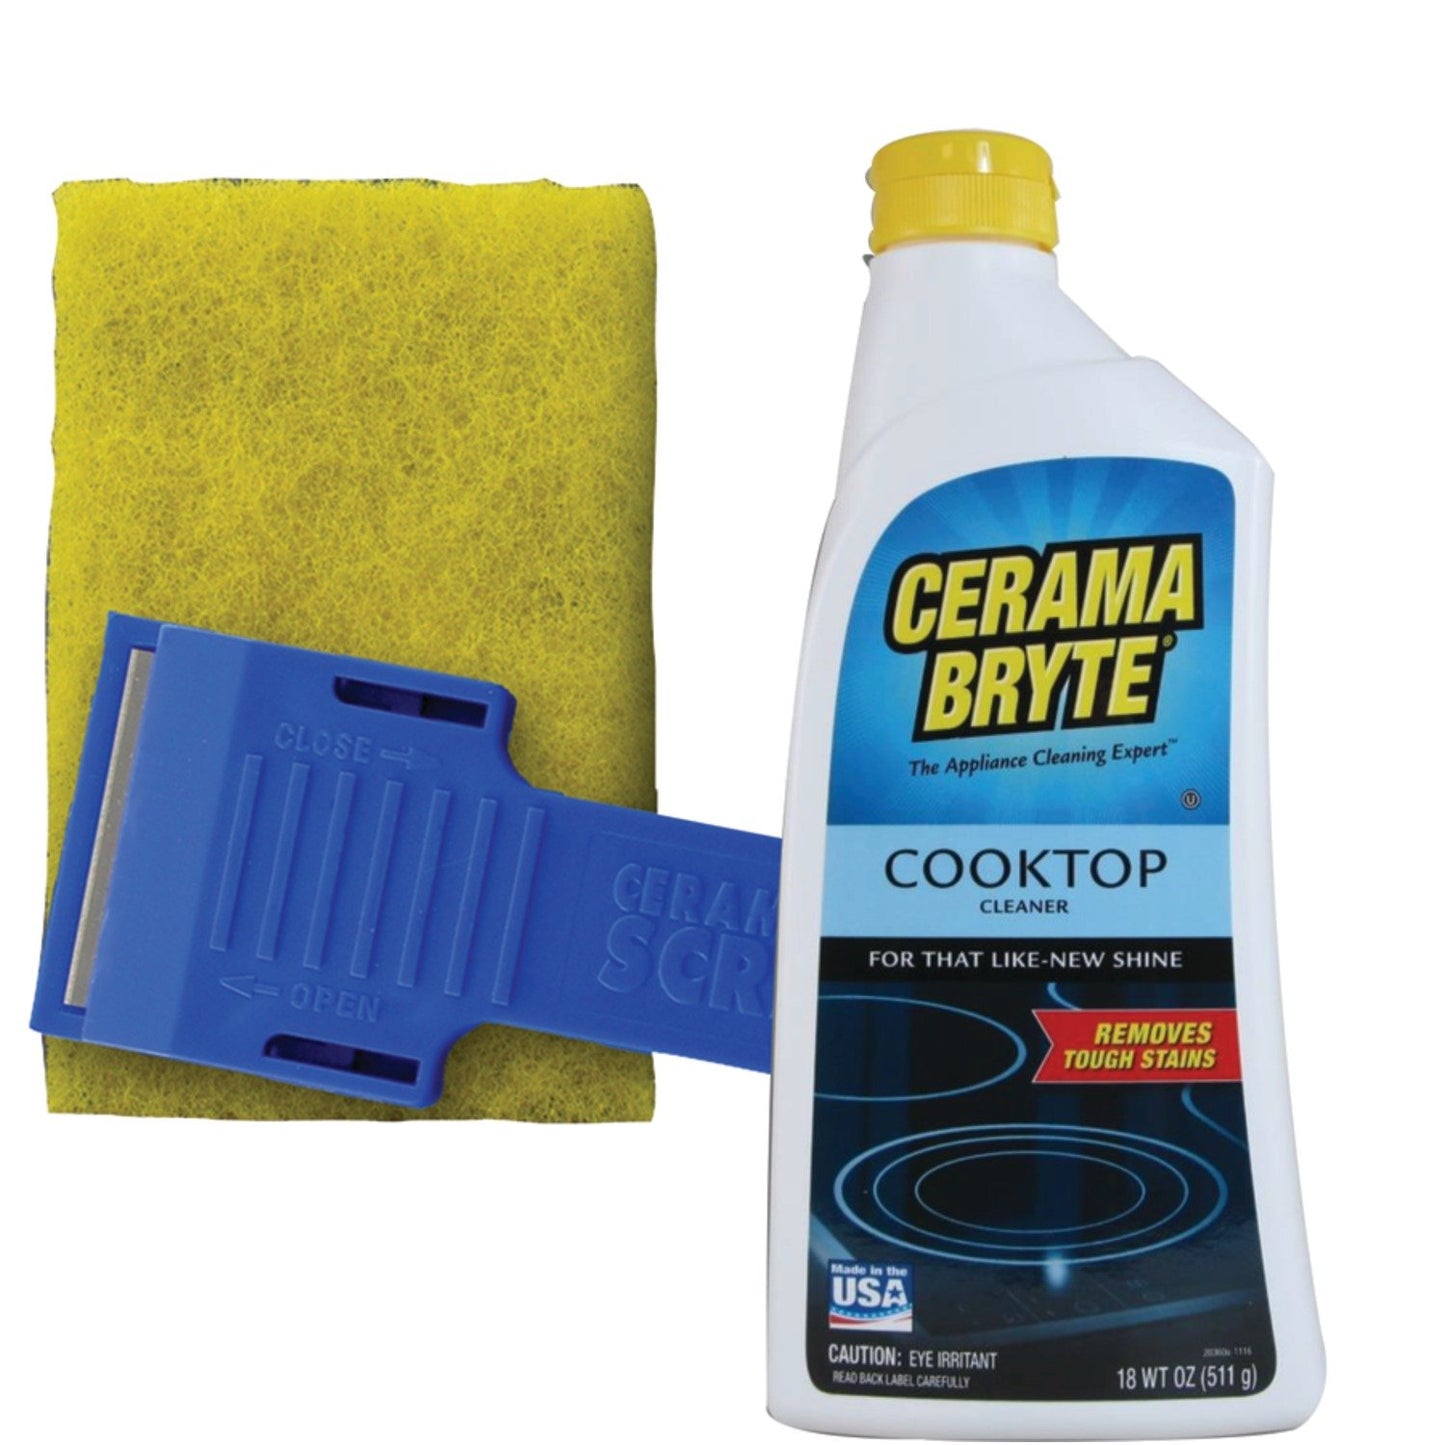 CERAMA BRYTE 27068 Cooktop Cleaning Kit